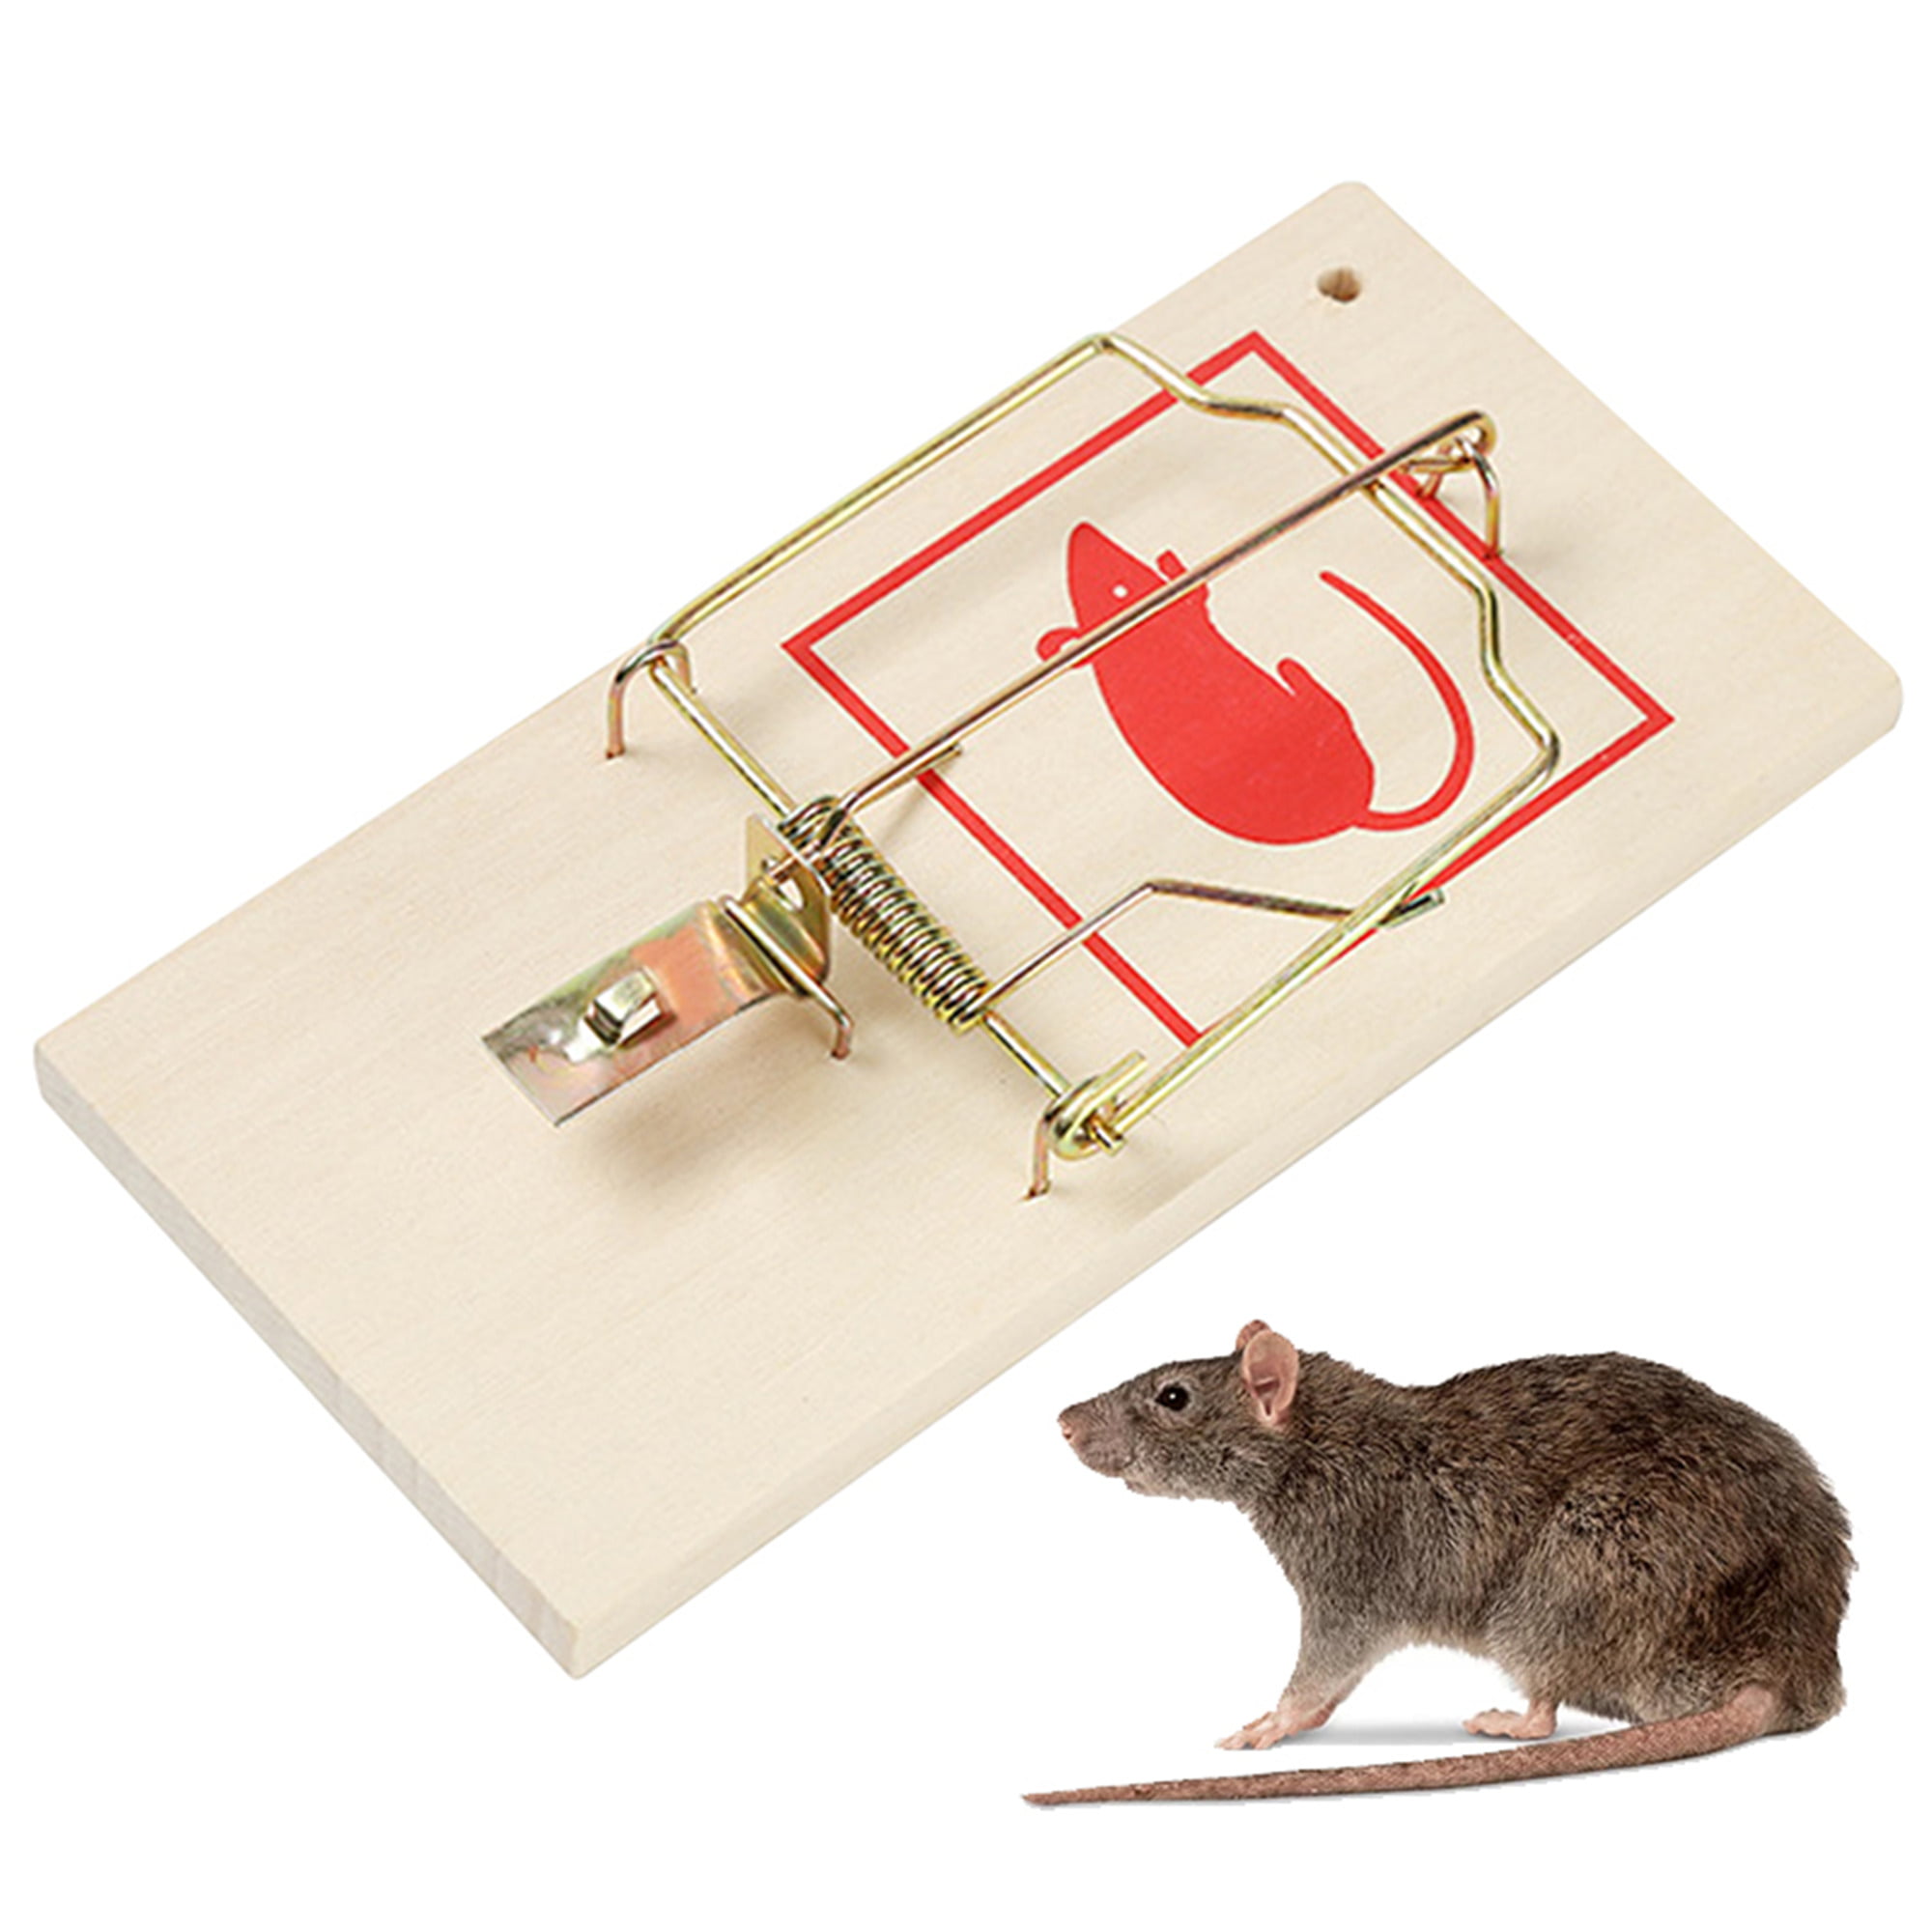 Elbourn 2-Pack Reusable Rat Catching - Mice Mouse Traps Rodent Catcher for Indoor Outside Pest Control, Size: 9.7x4.6x5.5 cm, Black